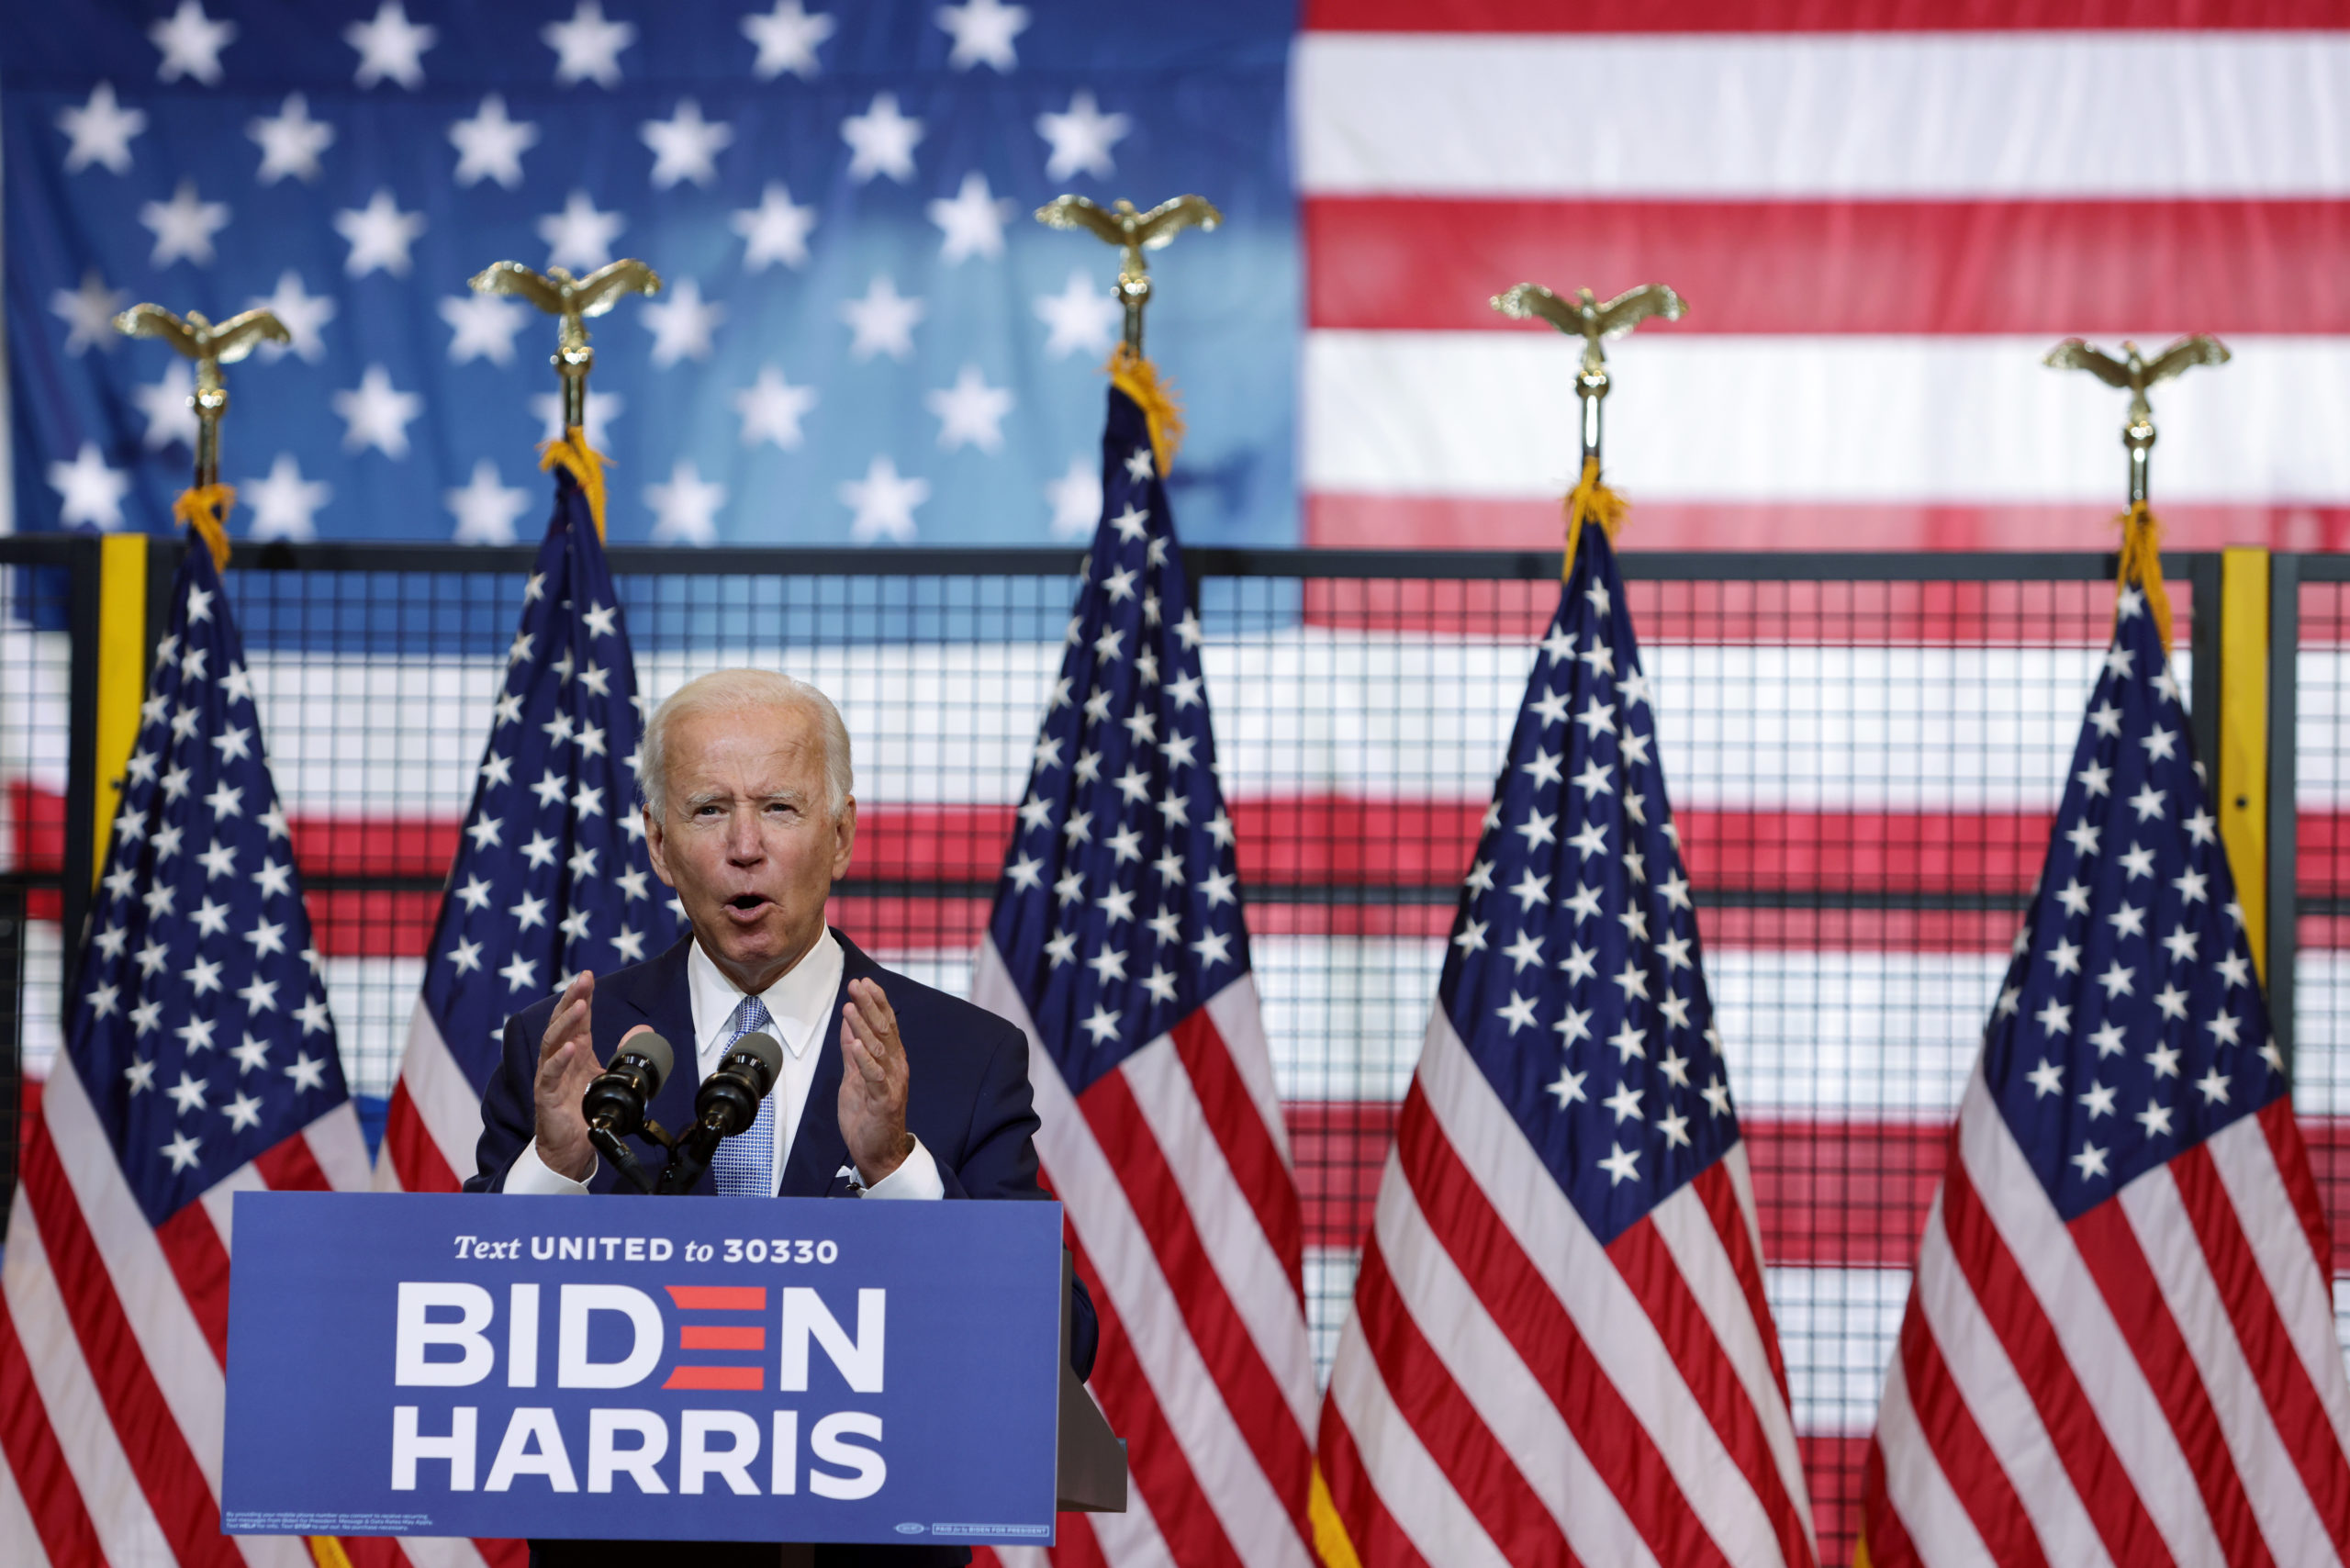 PITTSBURGH, PENNSYLVANIA - AUGUST 31: Democratic presidential candidate former Vice President Joe Biden speaks during a campaign event at Mill 19 on August 31, 2020 in Pittsburgh, Pennsylvania. Biden criticized President Trump’s response to protests in Kenosha, Wisconsin and Portland, Oregon. (Photo by Alex Wong/Getty Images)